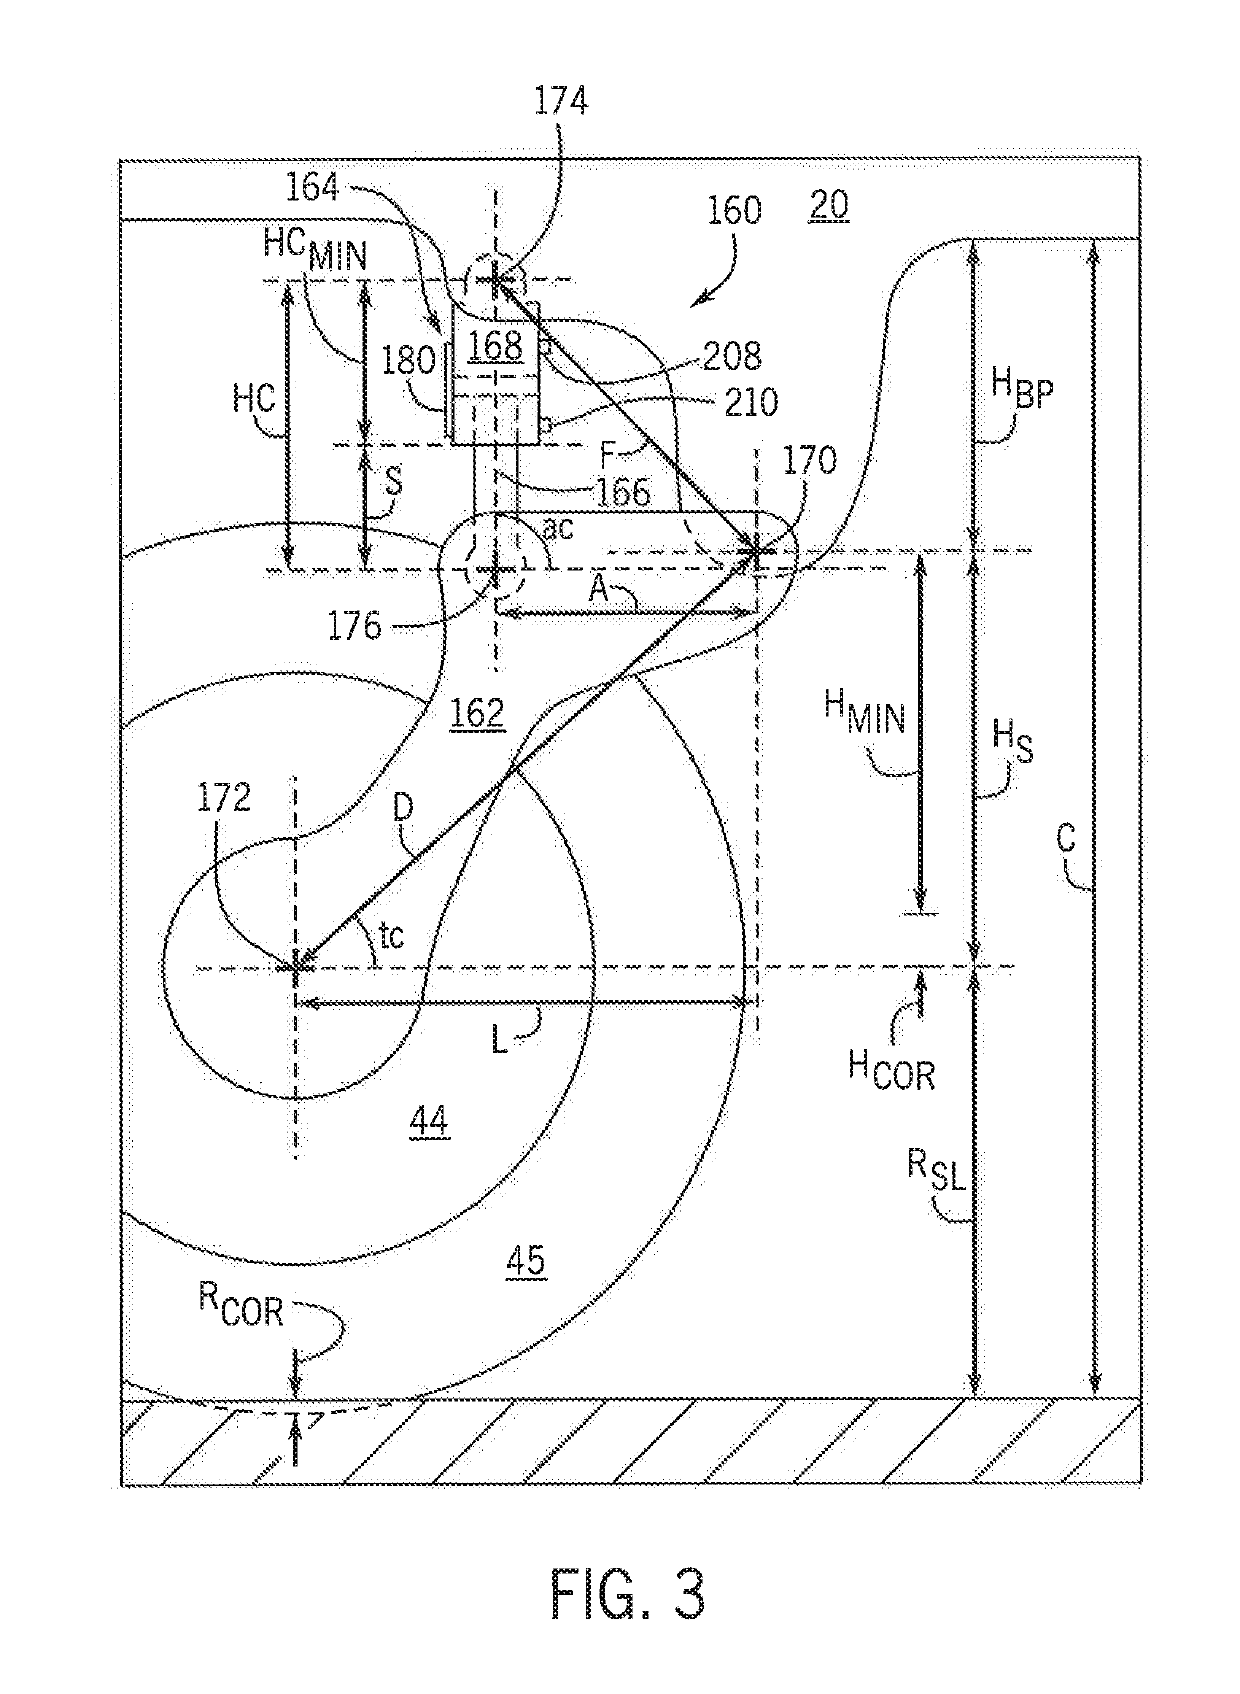 Suspension Control System Providing Closed Loop Control Of Hydraulic Fluid Volumes For An Agricultural Machine